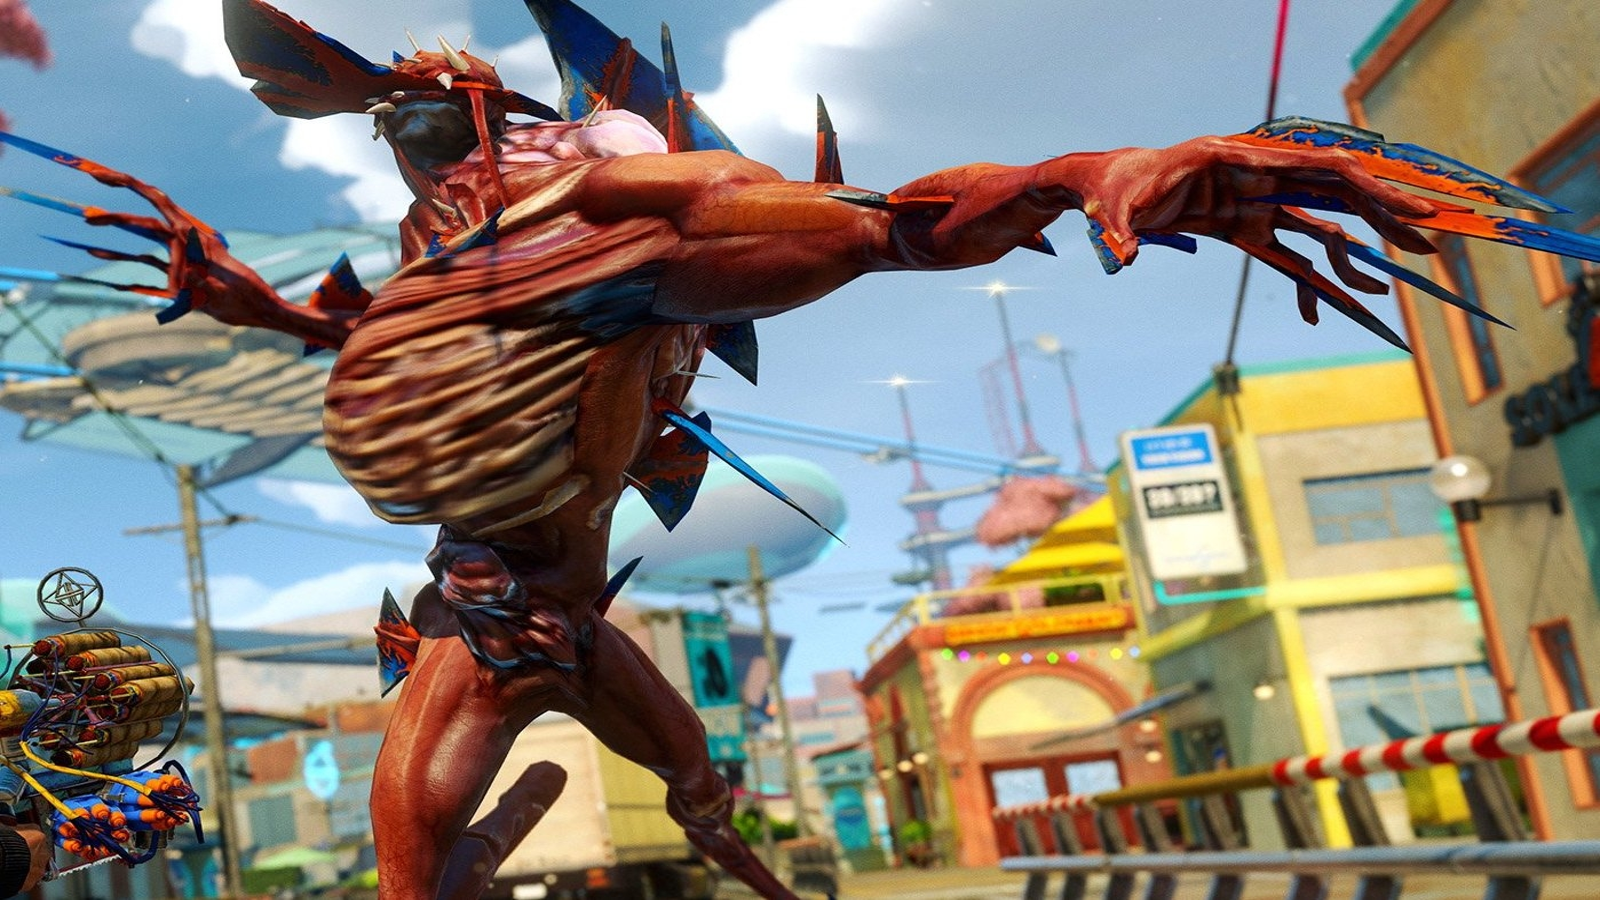 Sunset Overdrive Free For All Xbox Live Subscribers Tomorrow - IGN